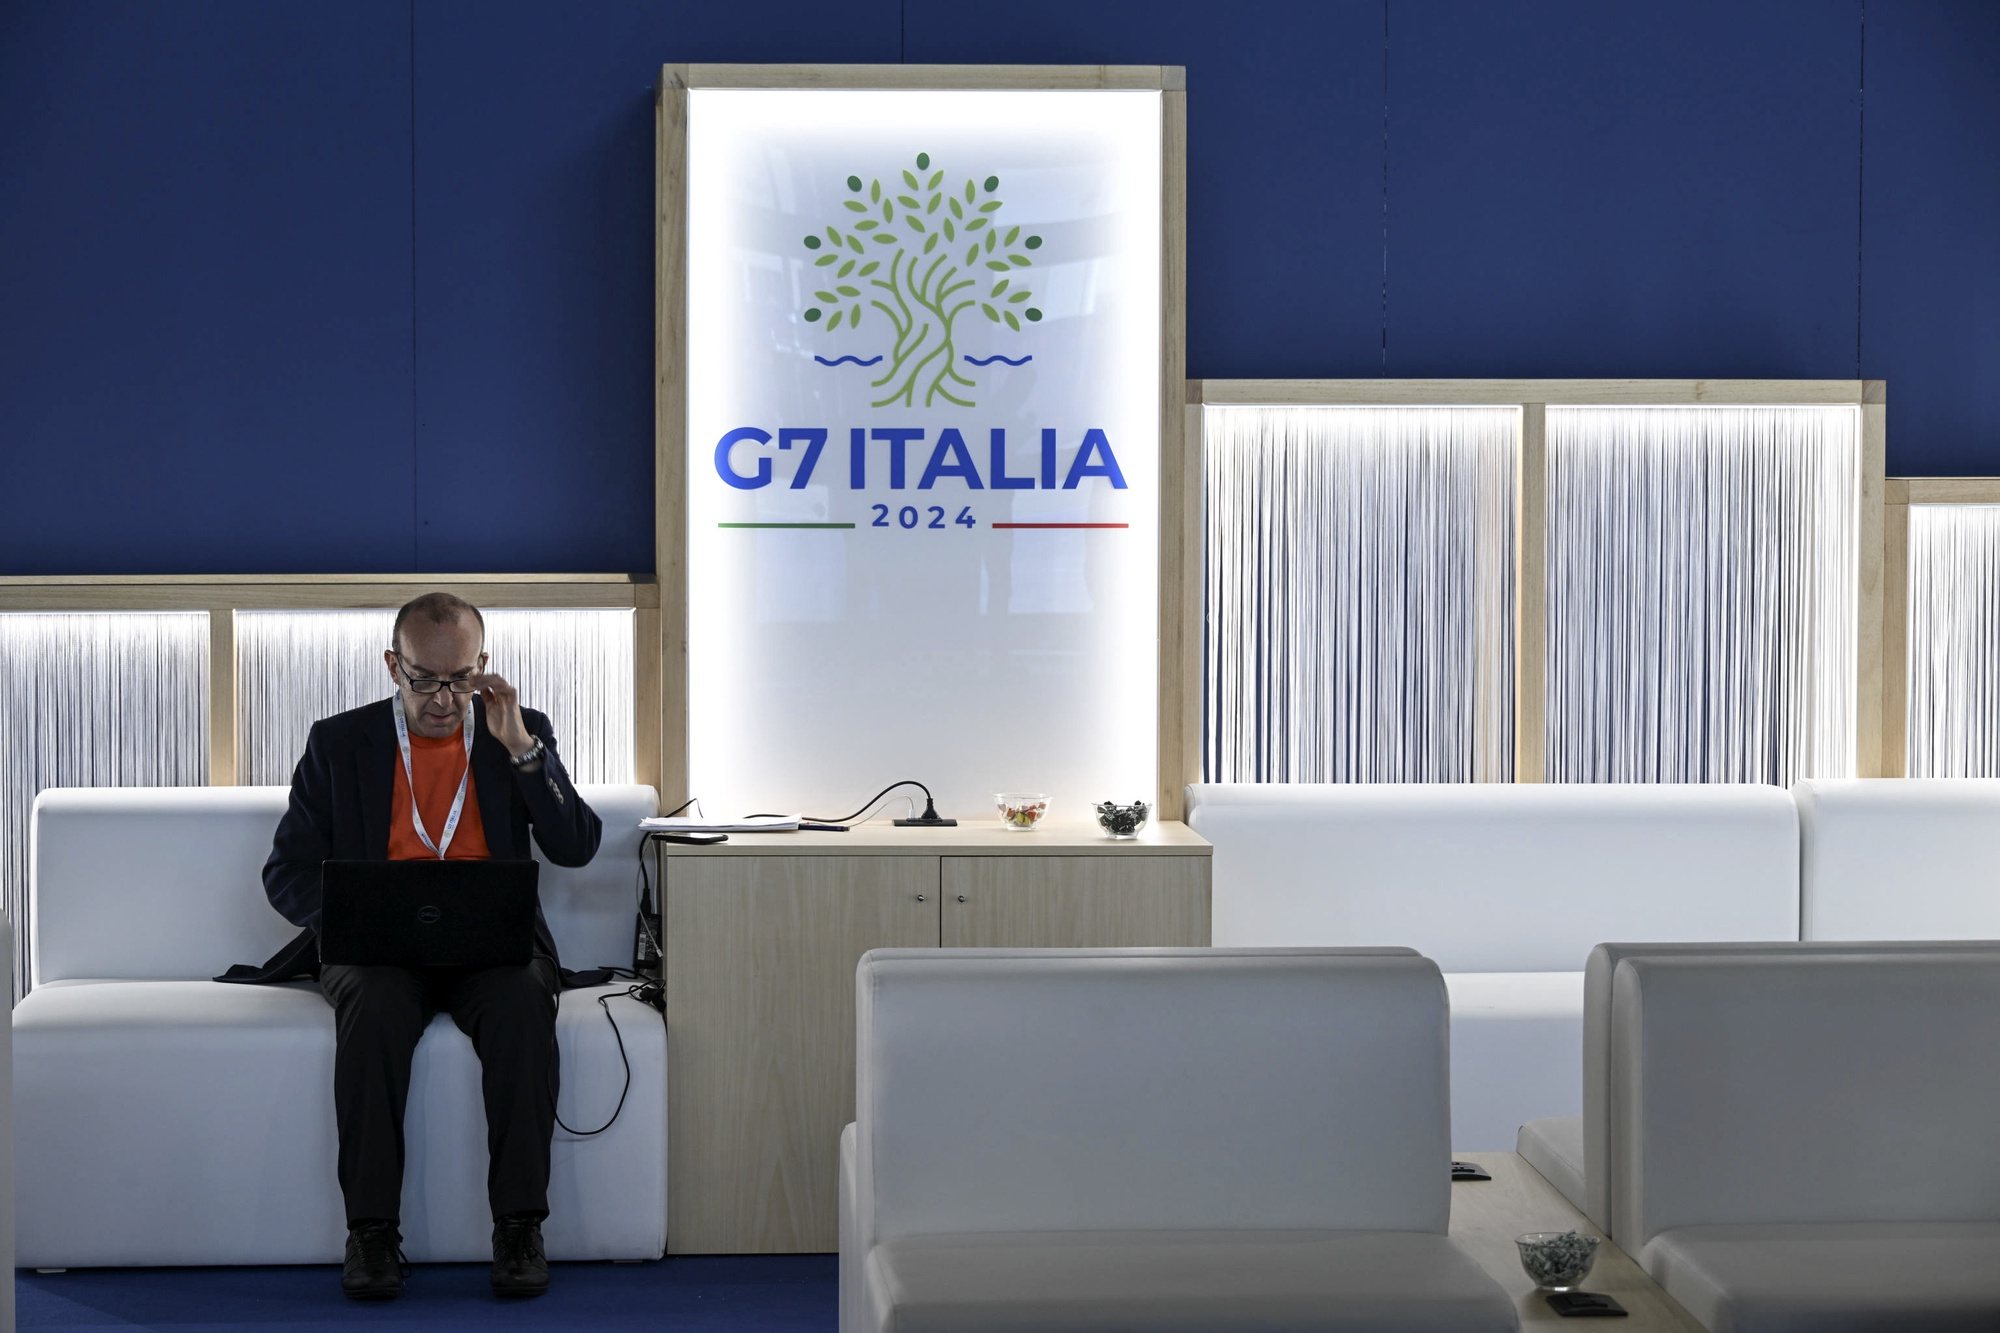 epa11405669 A journalist sits in the media center set up at the G7 Summit venue in Borgo Egnazia resort, near Bari, southern Italy, 12 June 2024. The G7 summit will bring together the Group of Seven member states leaders in Borgo Egnazia resort in southern Italy from 13 to 15 June 2024.  EPA/CIRO FUSCO